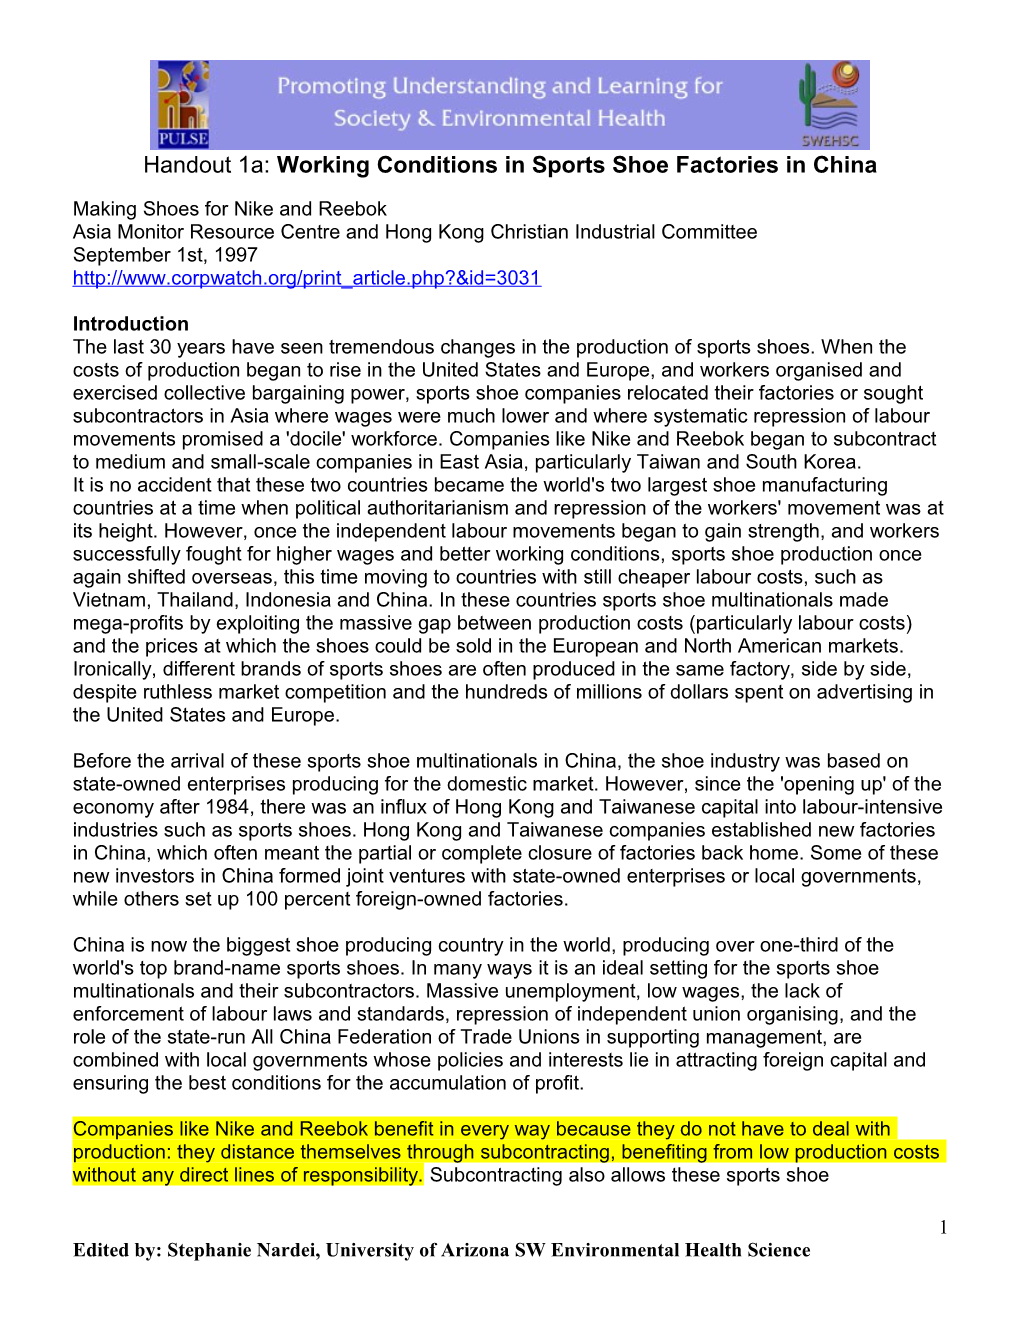 Handout 1A: Working Conditions in Sports Shoe Factories in China